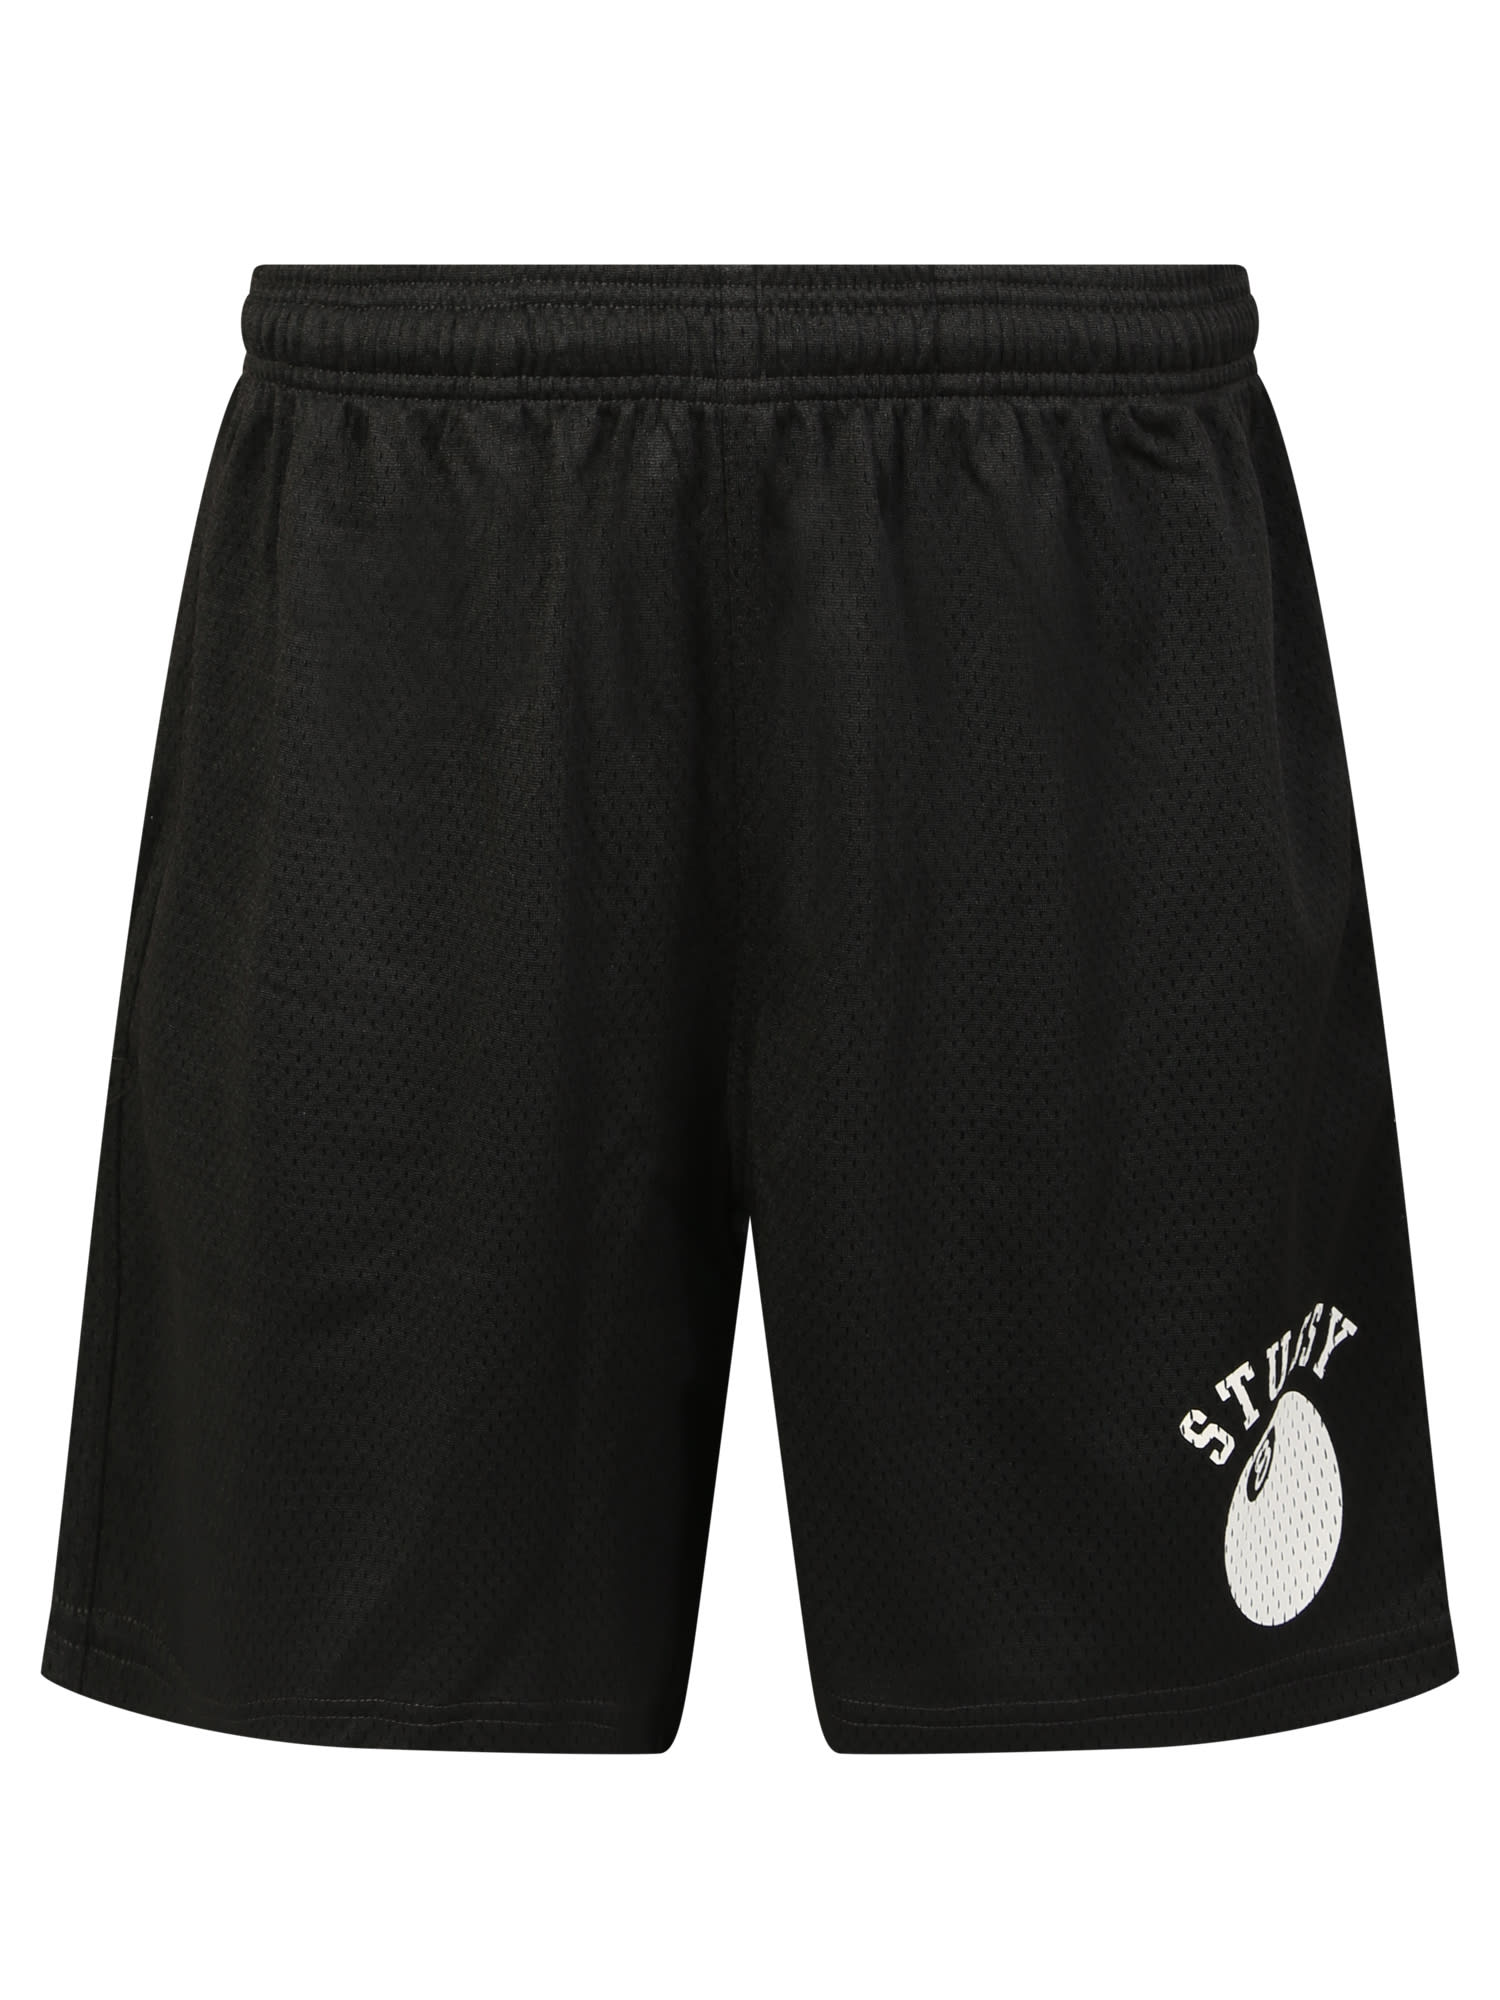 Stussy Soft Design Shorts With An Elasticated Waist By Stussy